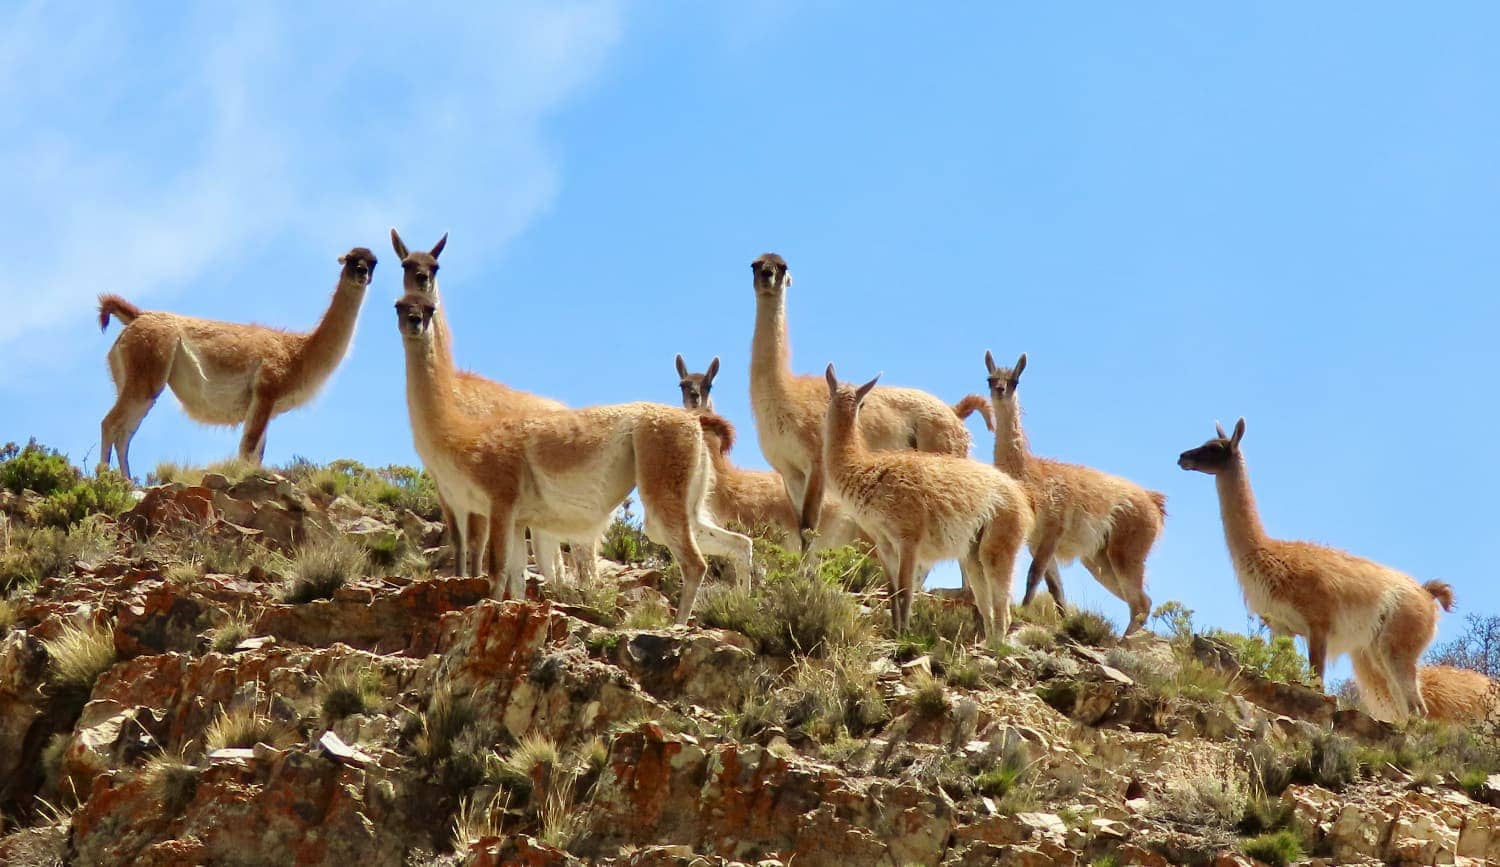 Multiple South American llamas standing on hillside looking towards camera with blue sky in background